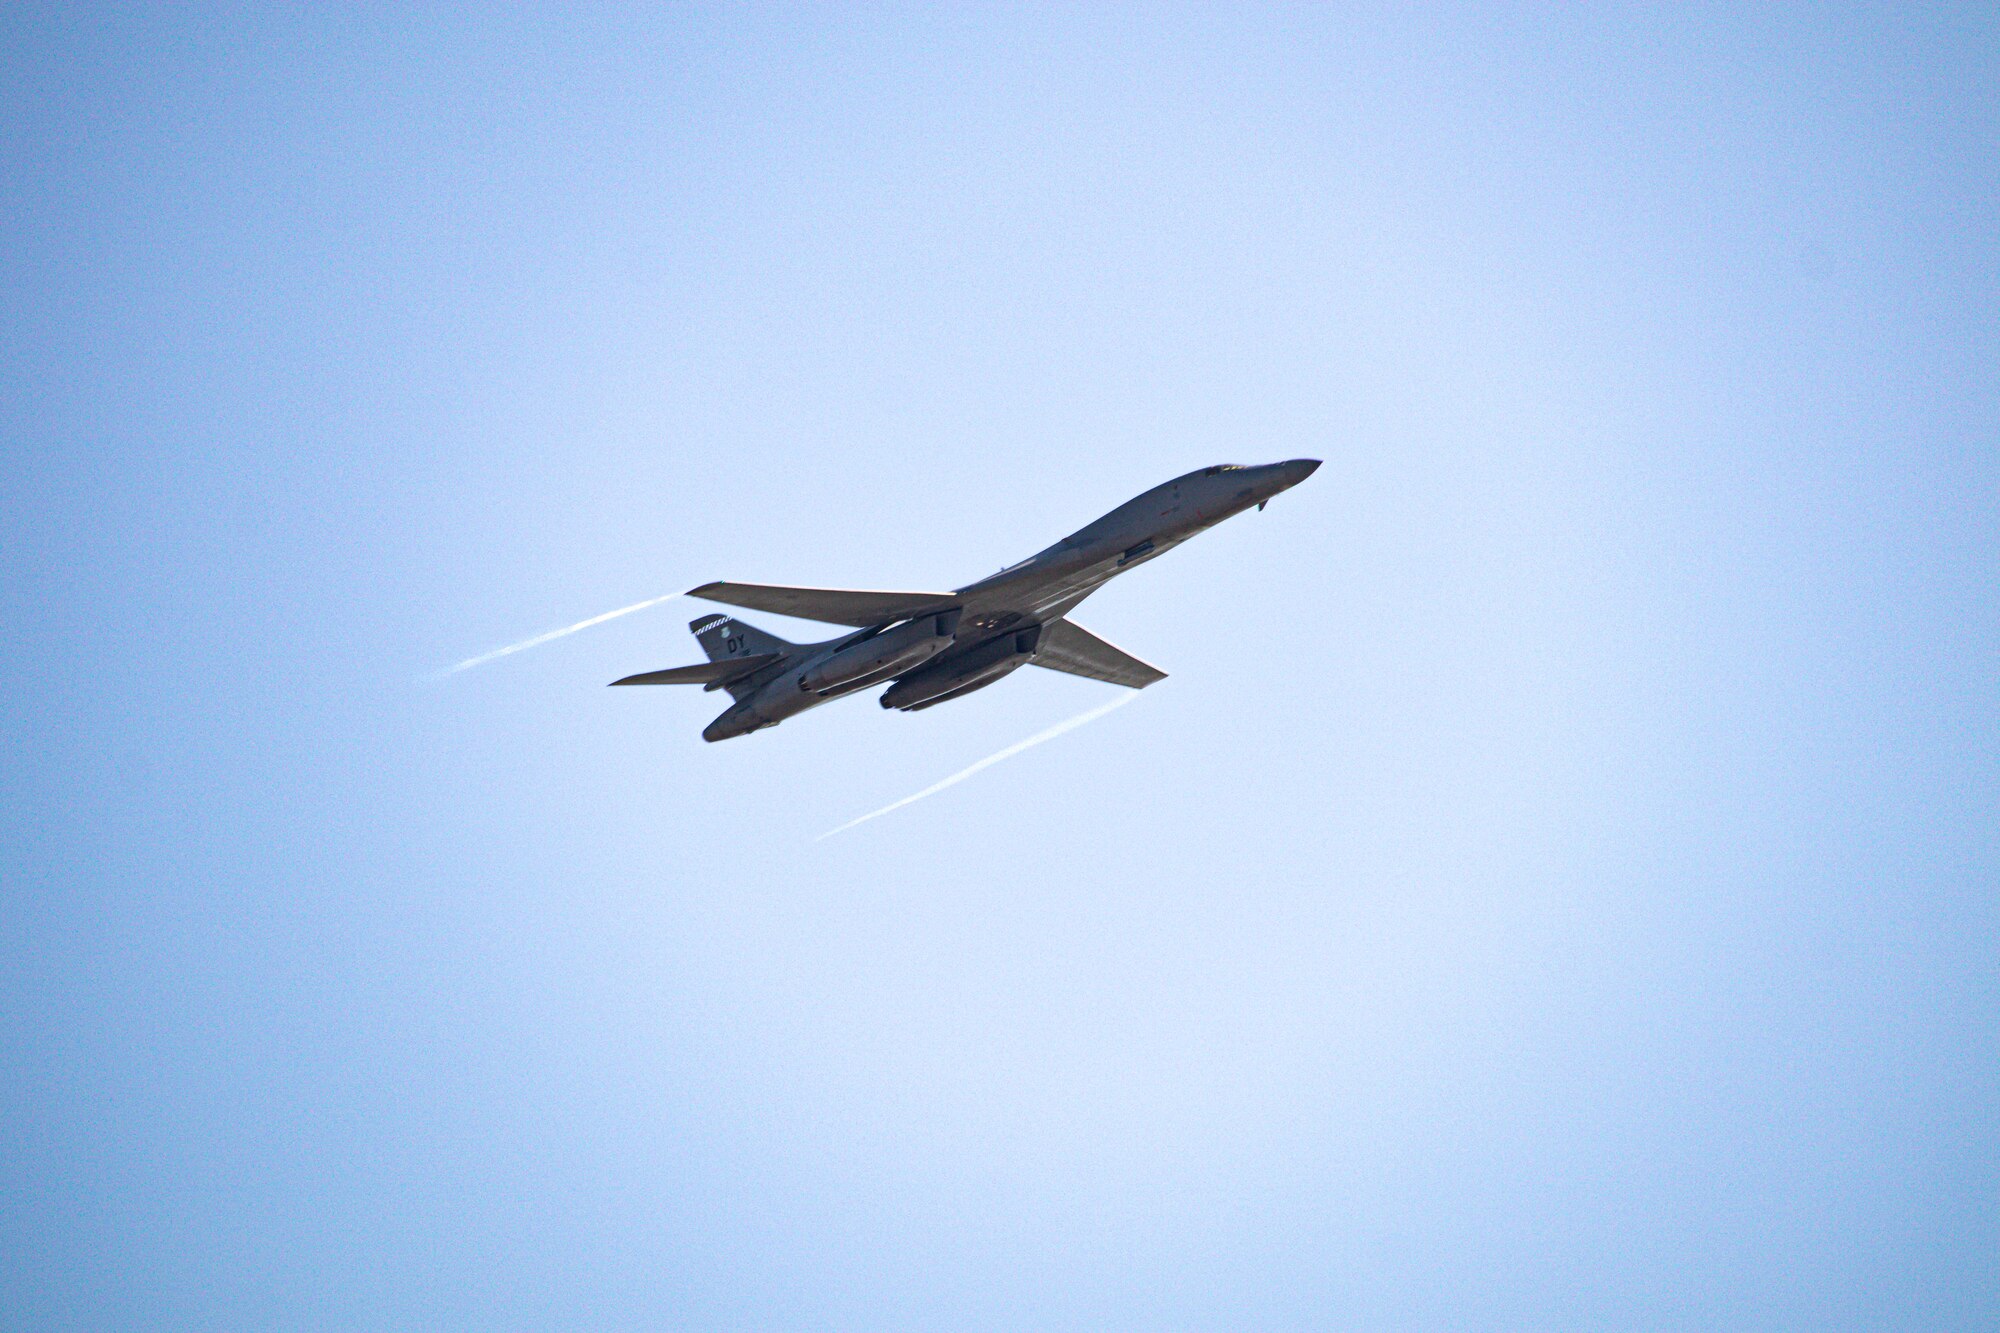 B1-B Lancer from Dyess AFB